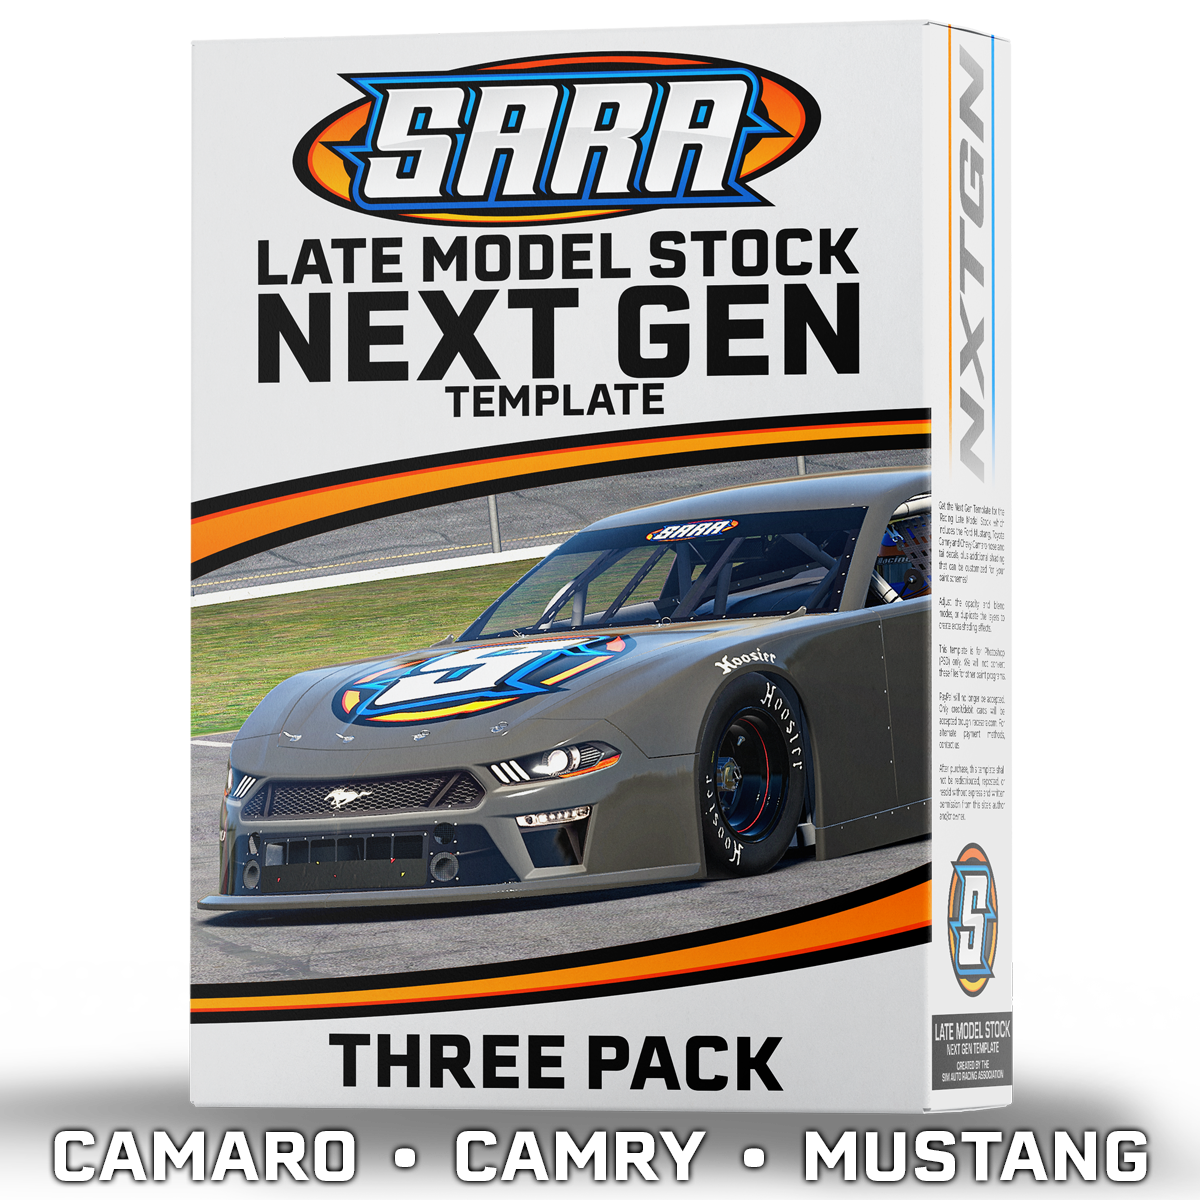 late-model-stock-template-3-pack-sim-auto-racing-association